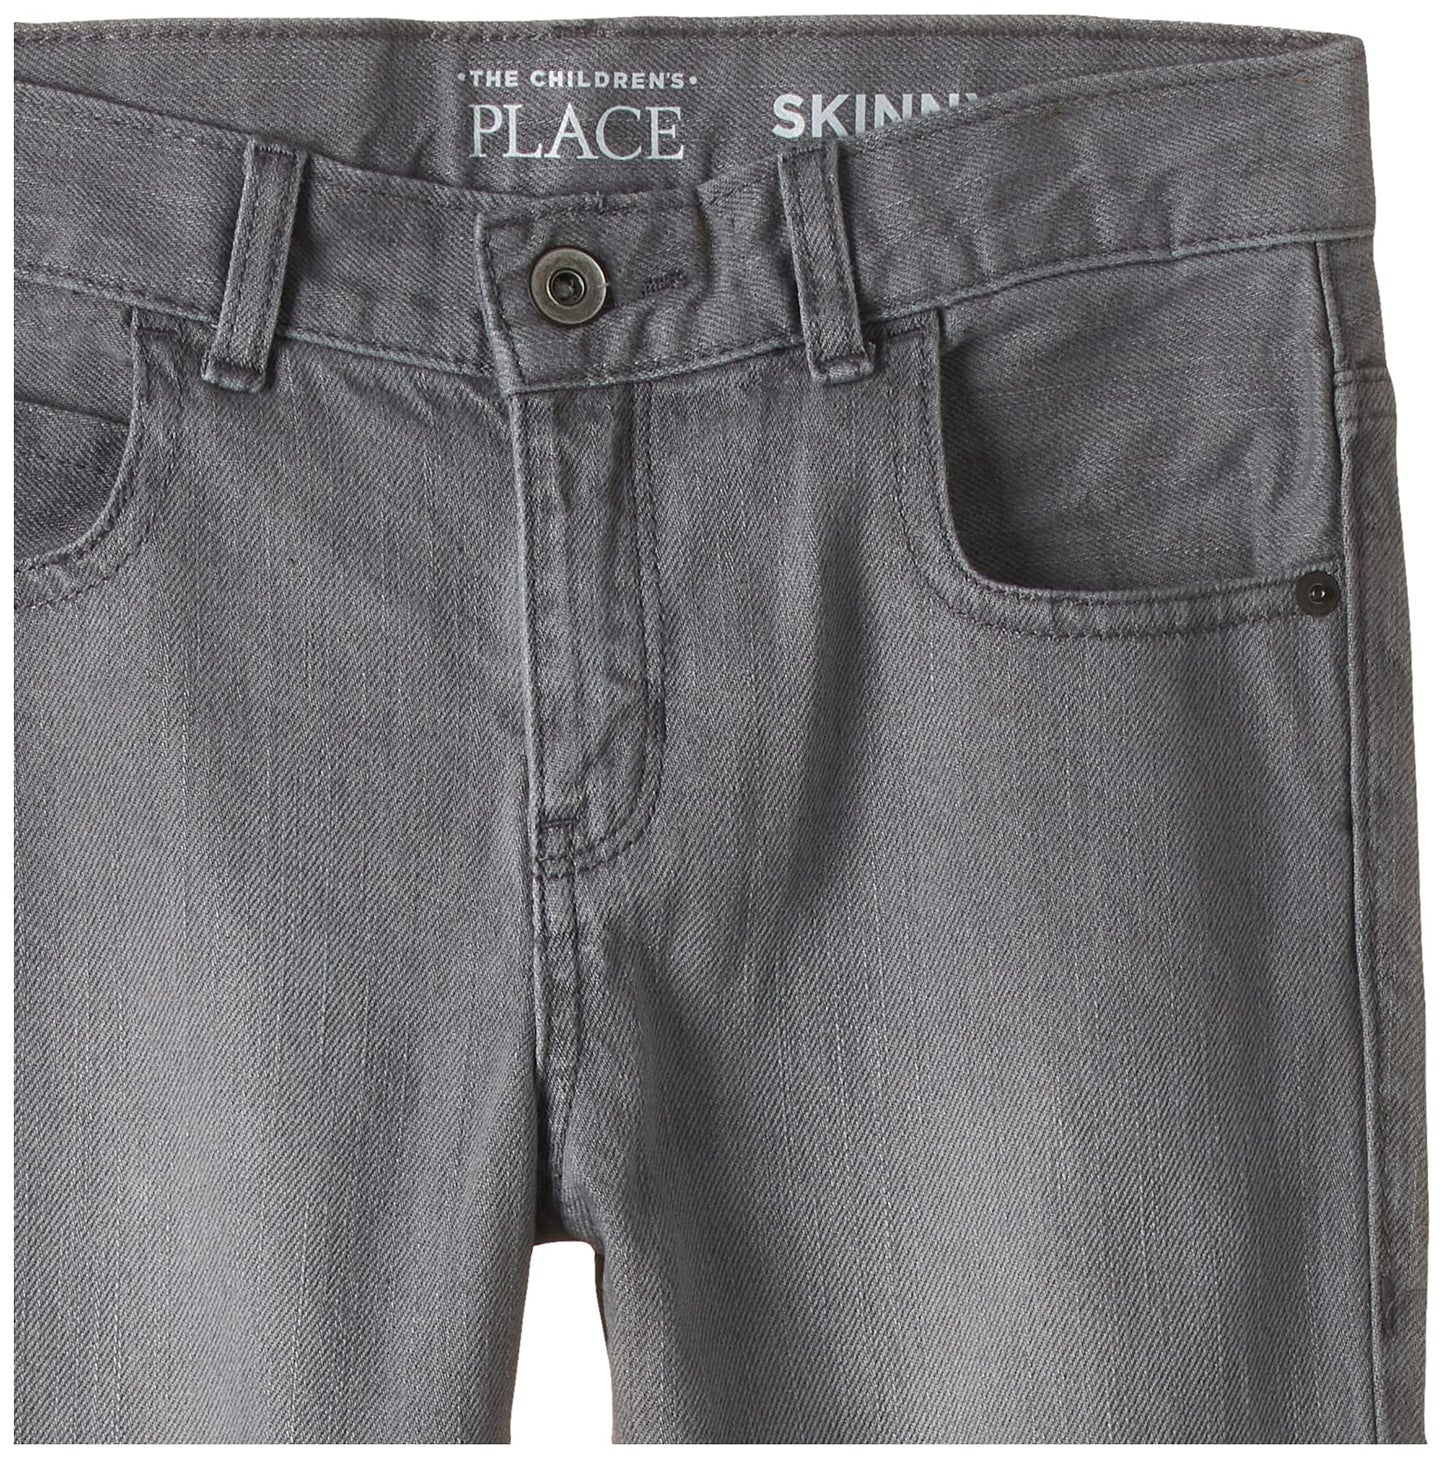 The Children's Place Boys TCP sknny jens bys pants Skinny (pack of 1)